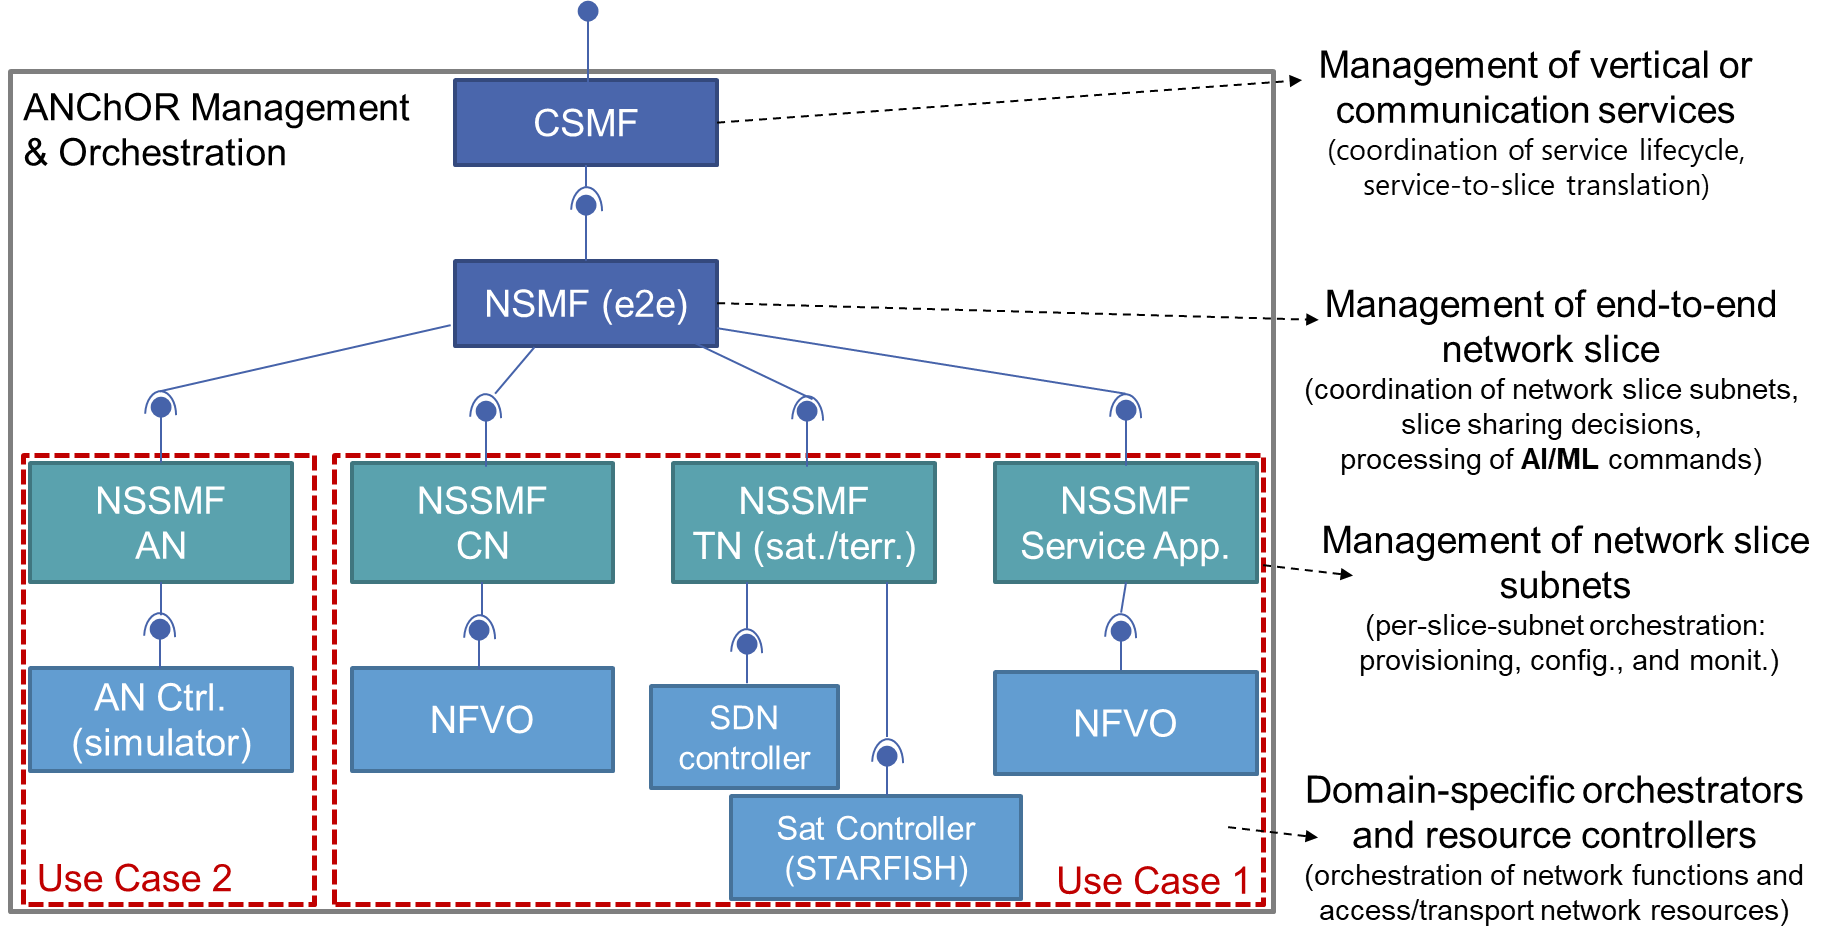 anchor system architecture